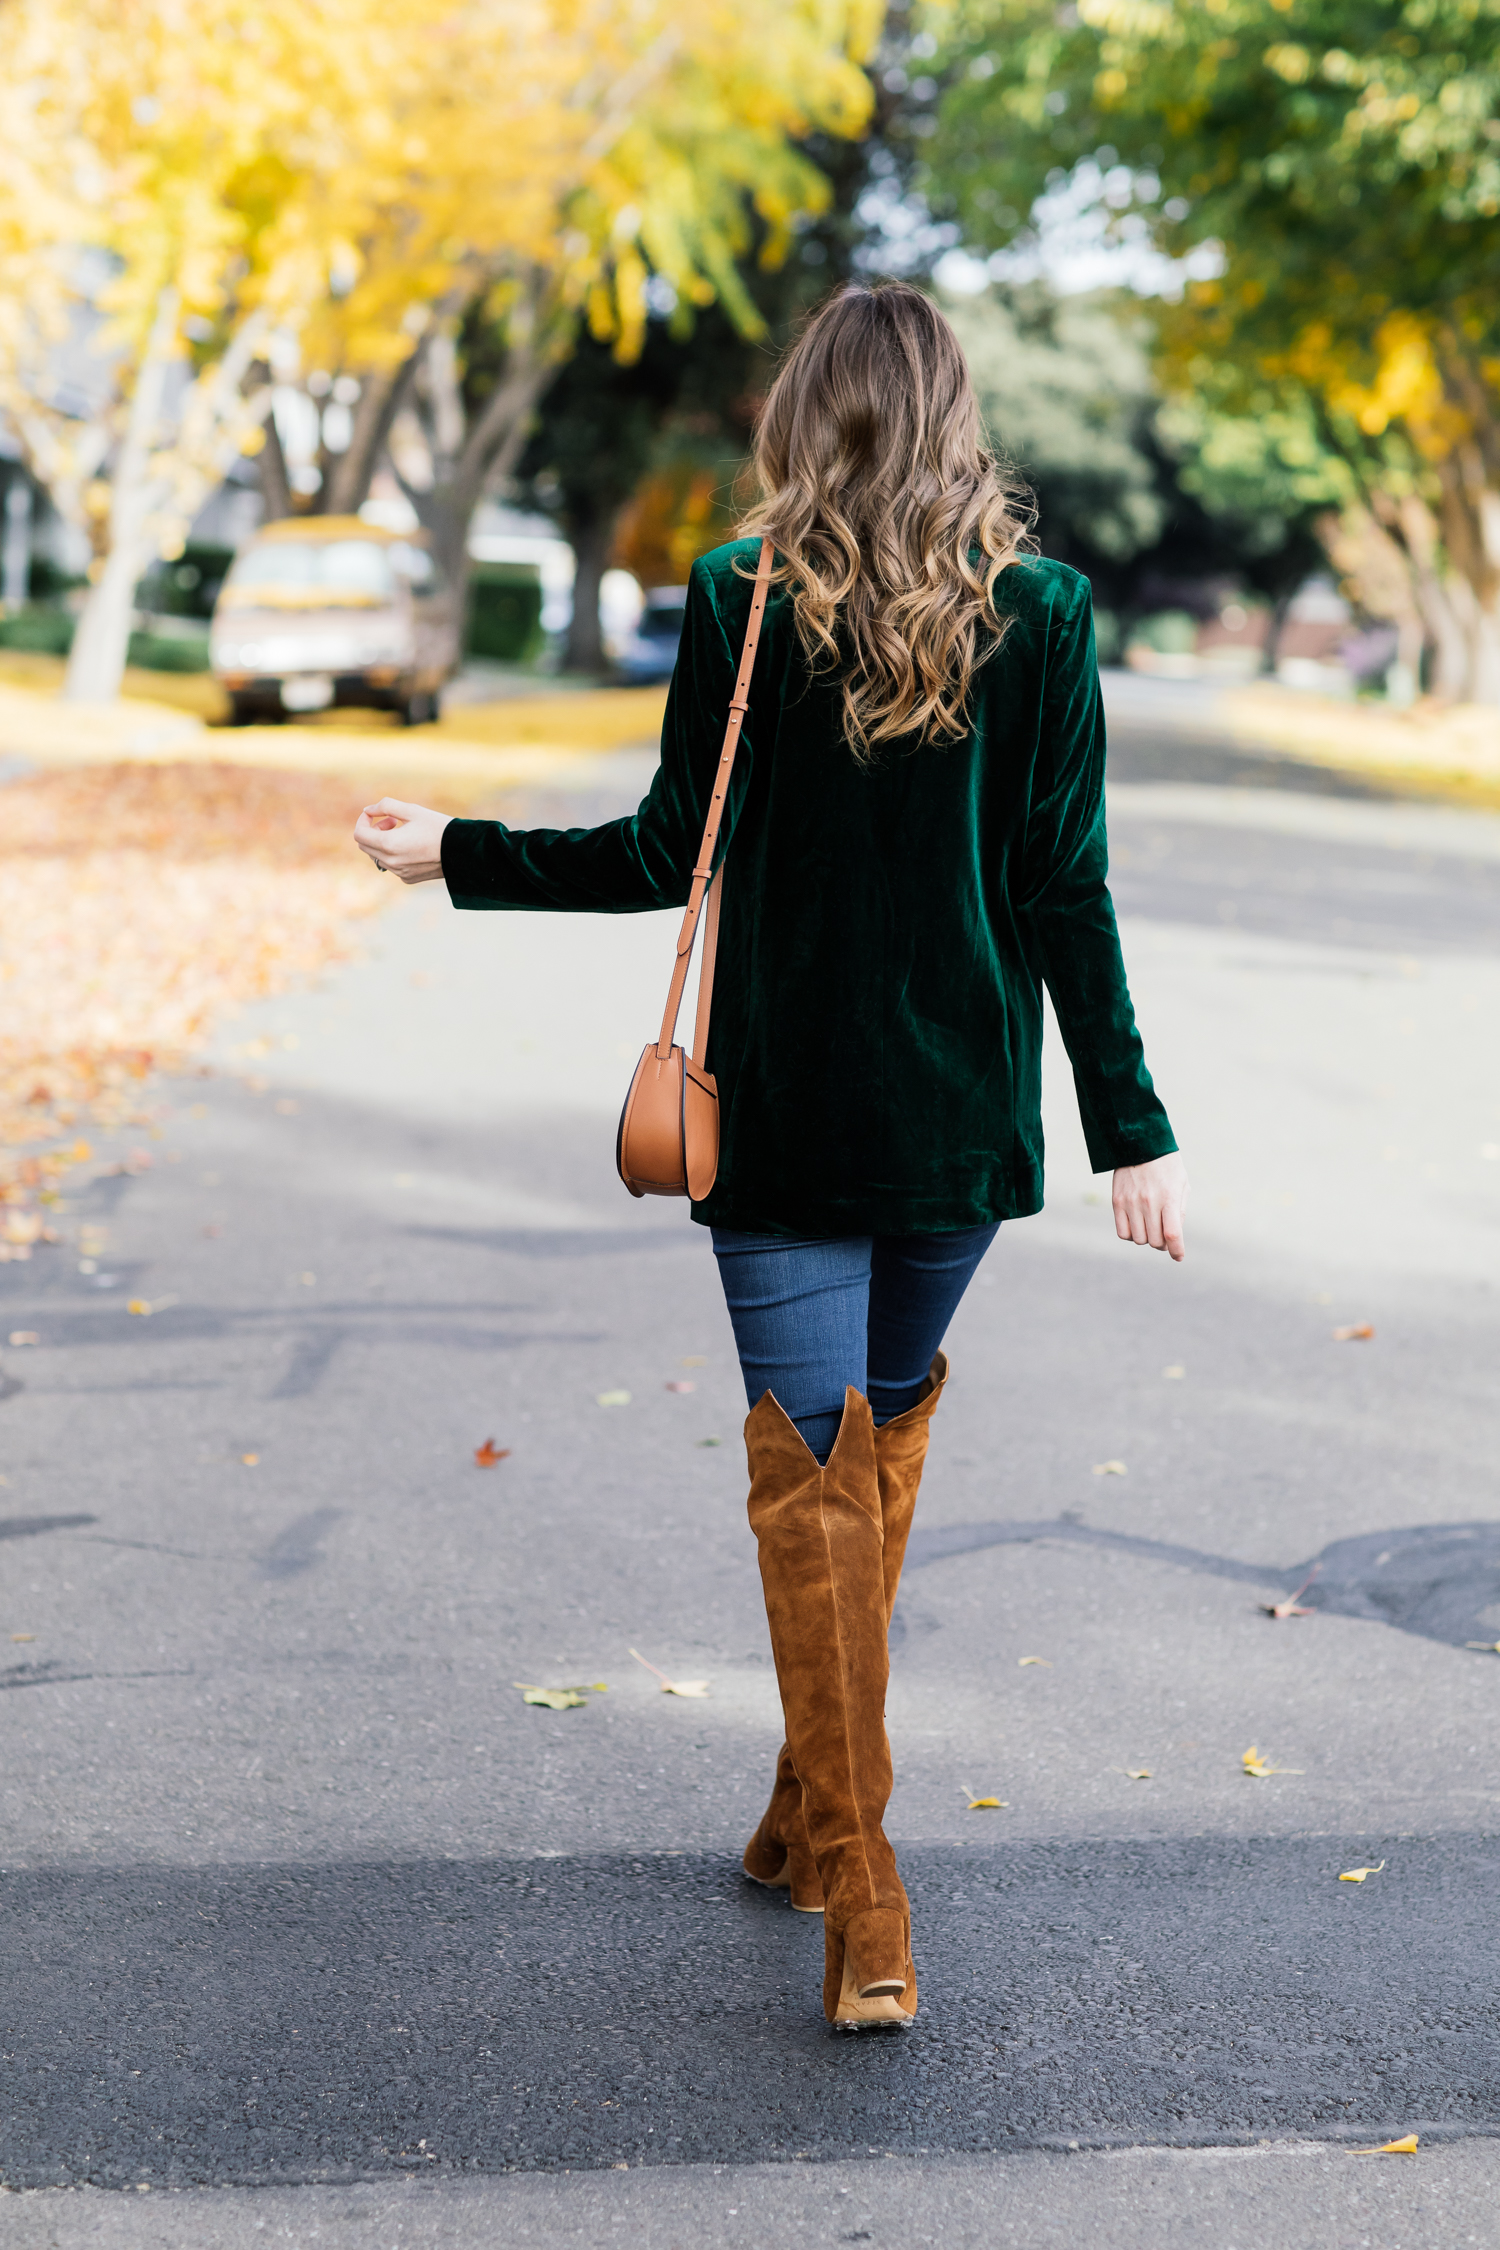 Alyssa Campanella of The A List blog shares the best velvet blazers for the holidays wearing On Parle de Vous green blazer, Cuyana mini saddle bag, and Sezane Emilie boots.